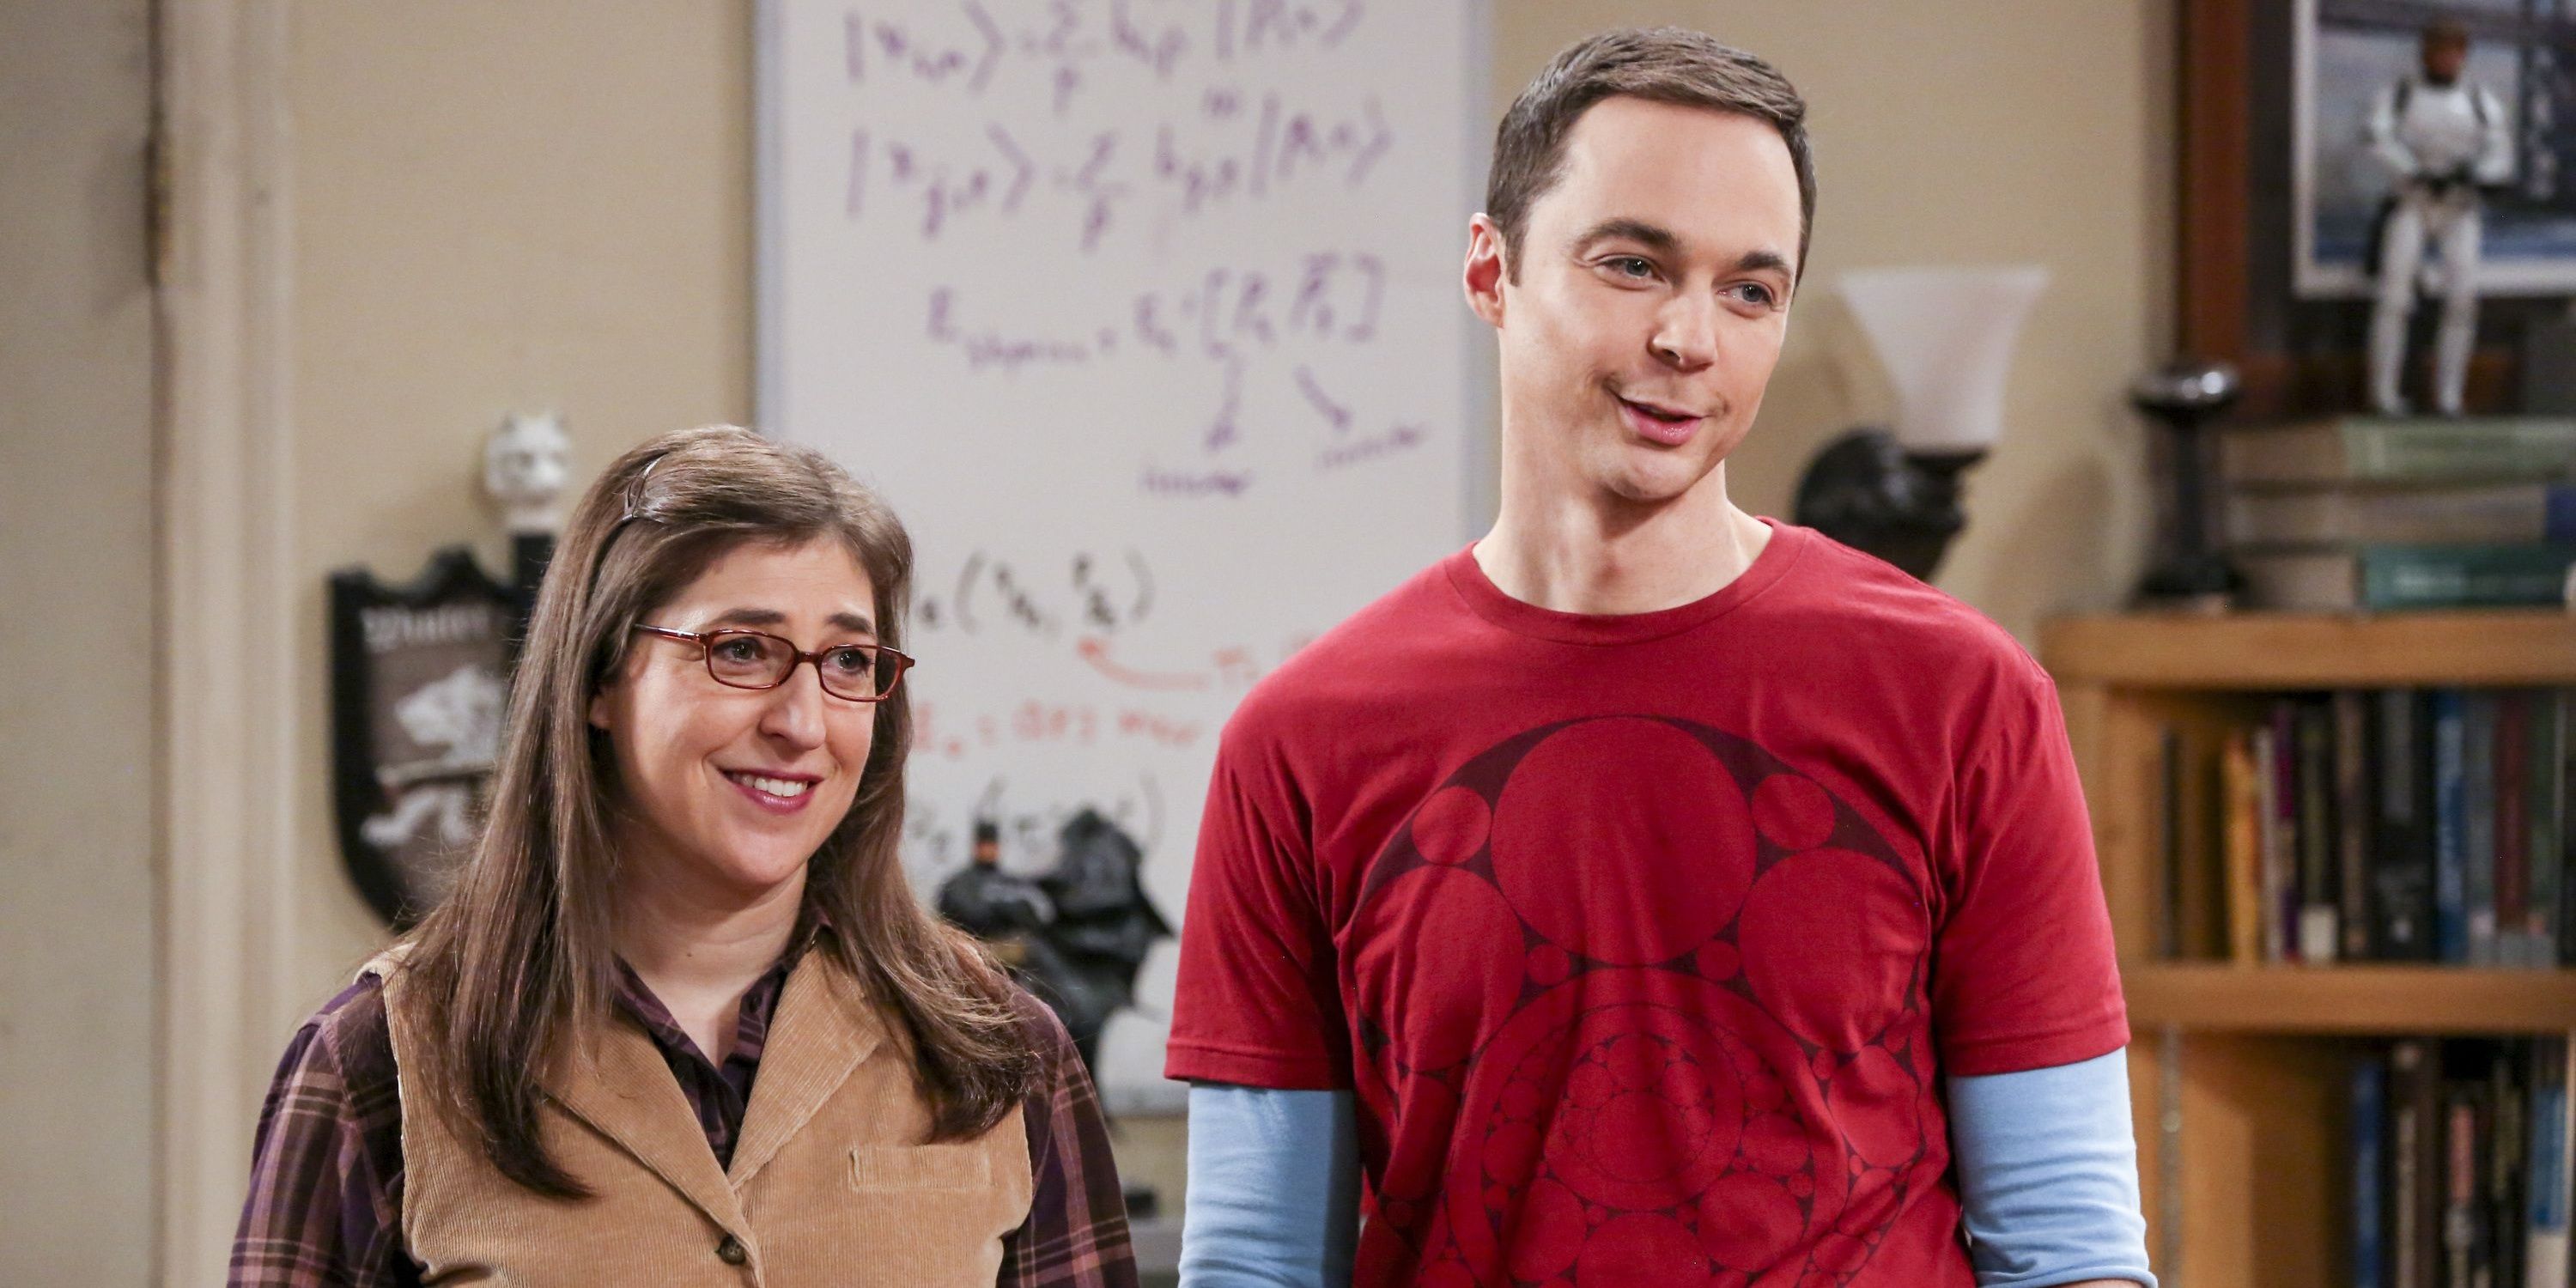 Sheldon and Amy smiling in his apartment on TBBT